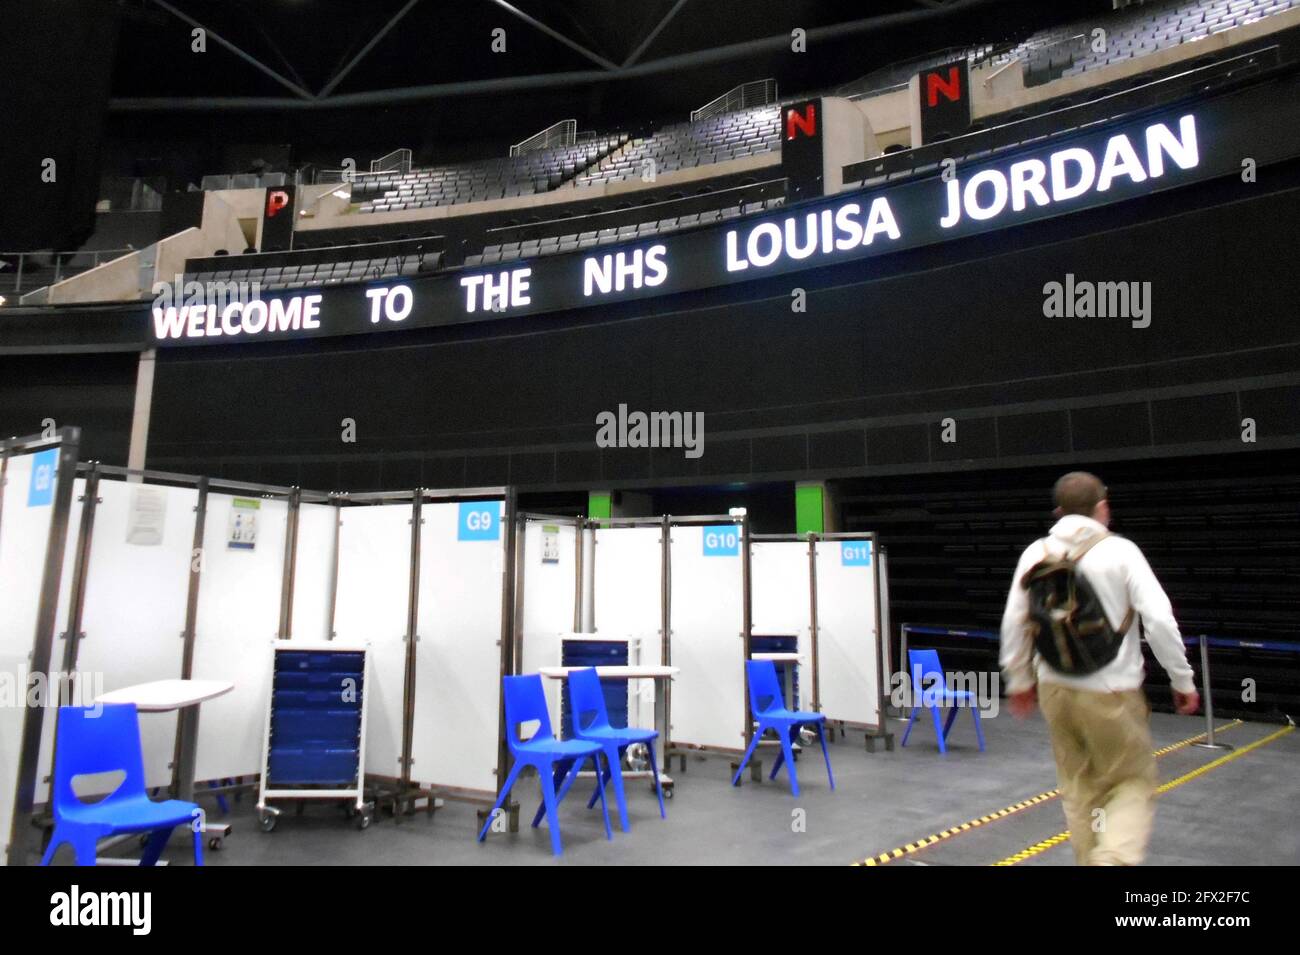 Inside the Louisa Jordan, NHS temporary hospital, where people in Glasgow get their anti-virus vaccination to combat the Covid virus. The venue is The Hydro and is used for concerts, bands and singers, and entertainment in general and can hold about 12,000 people. 2021. ©ALAN WYLIE/ALAMY Stock Photo